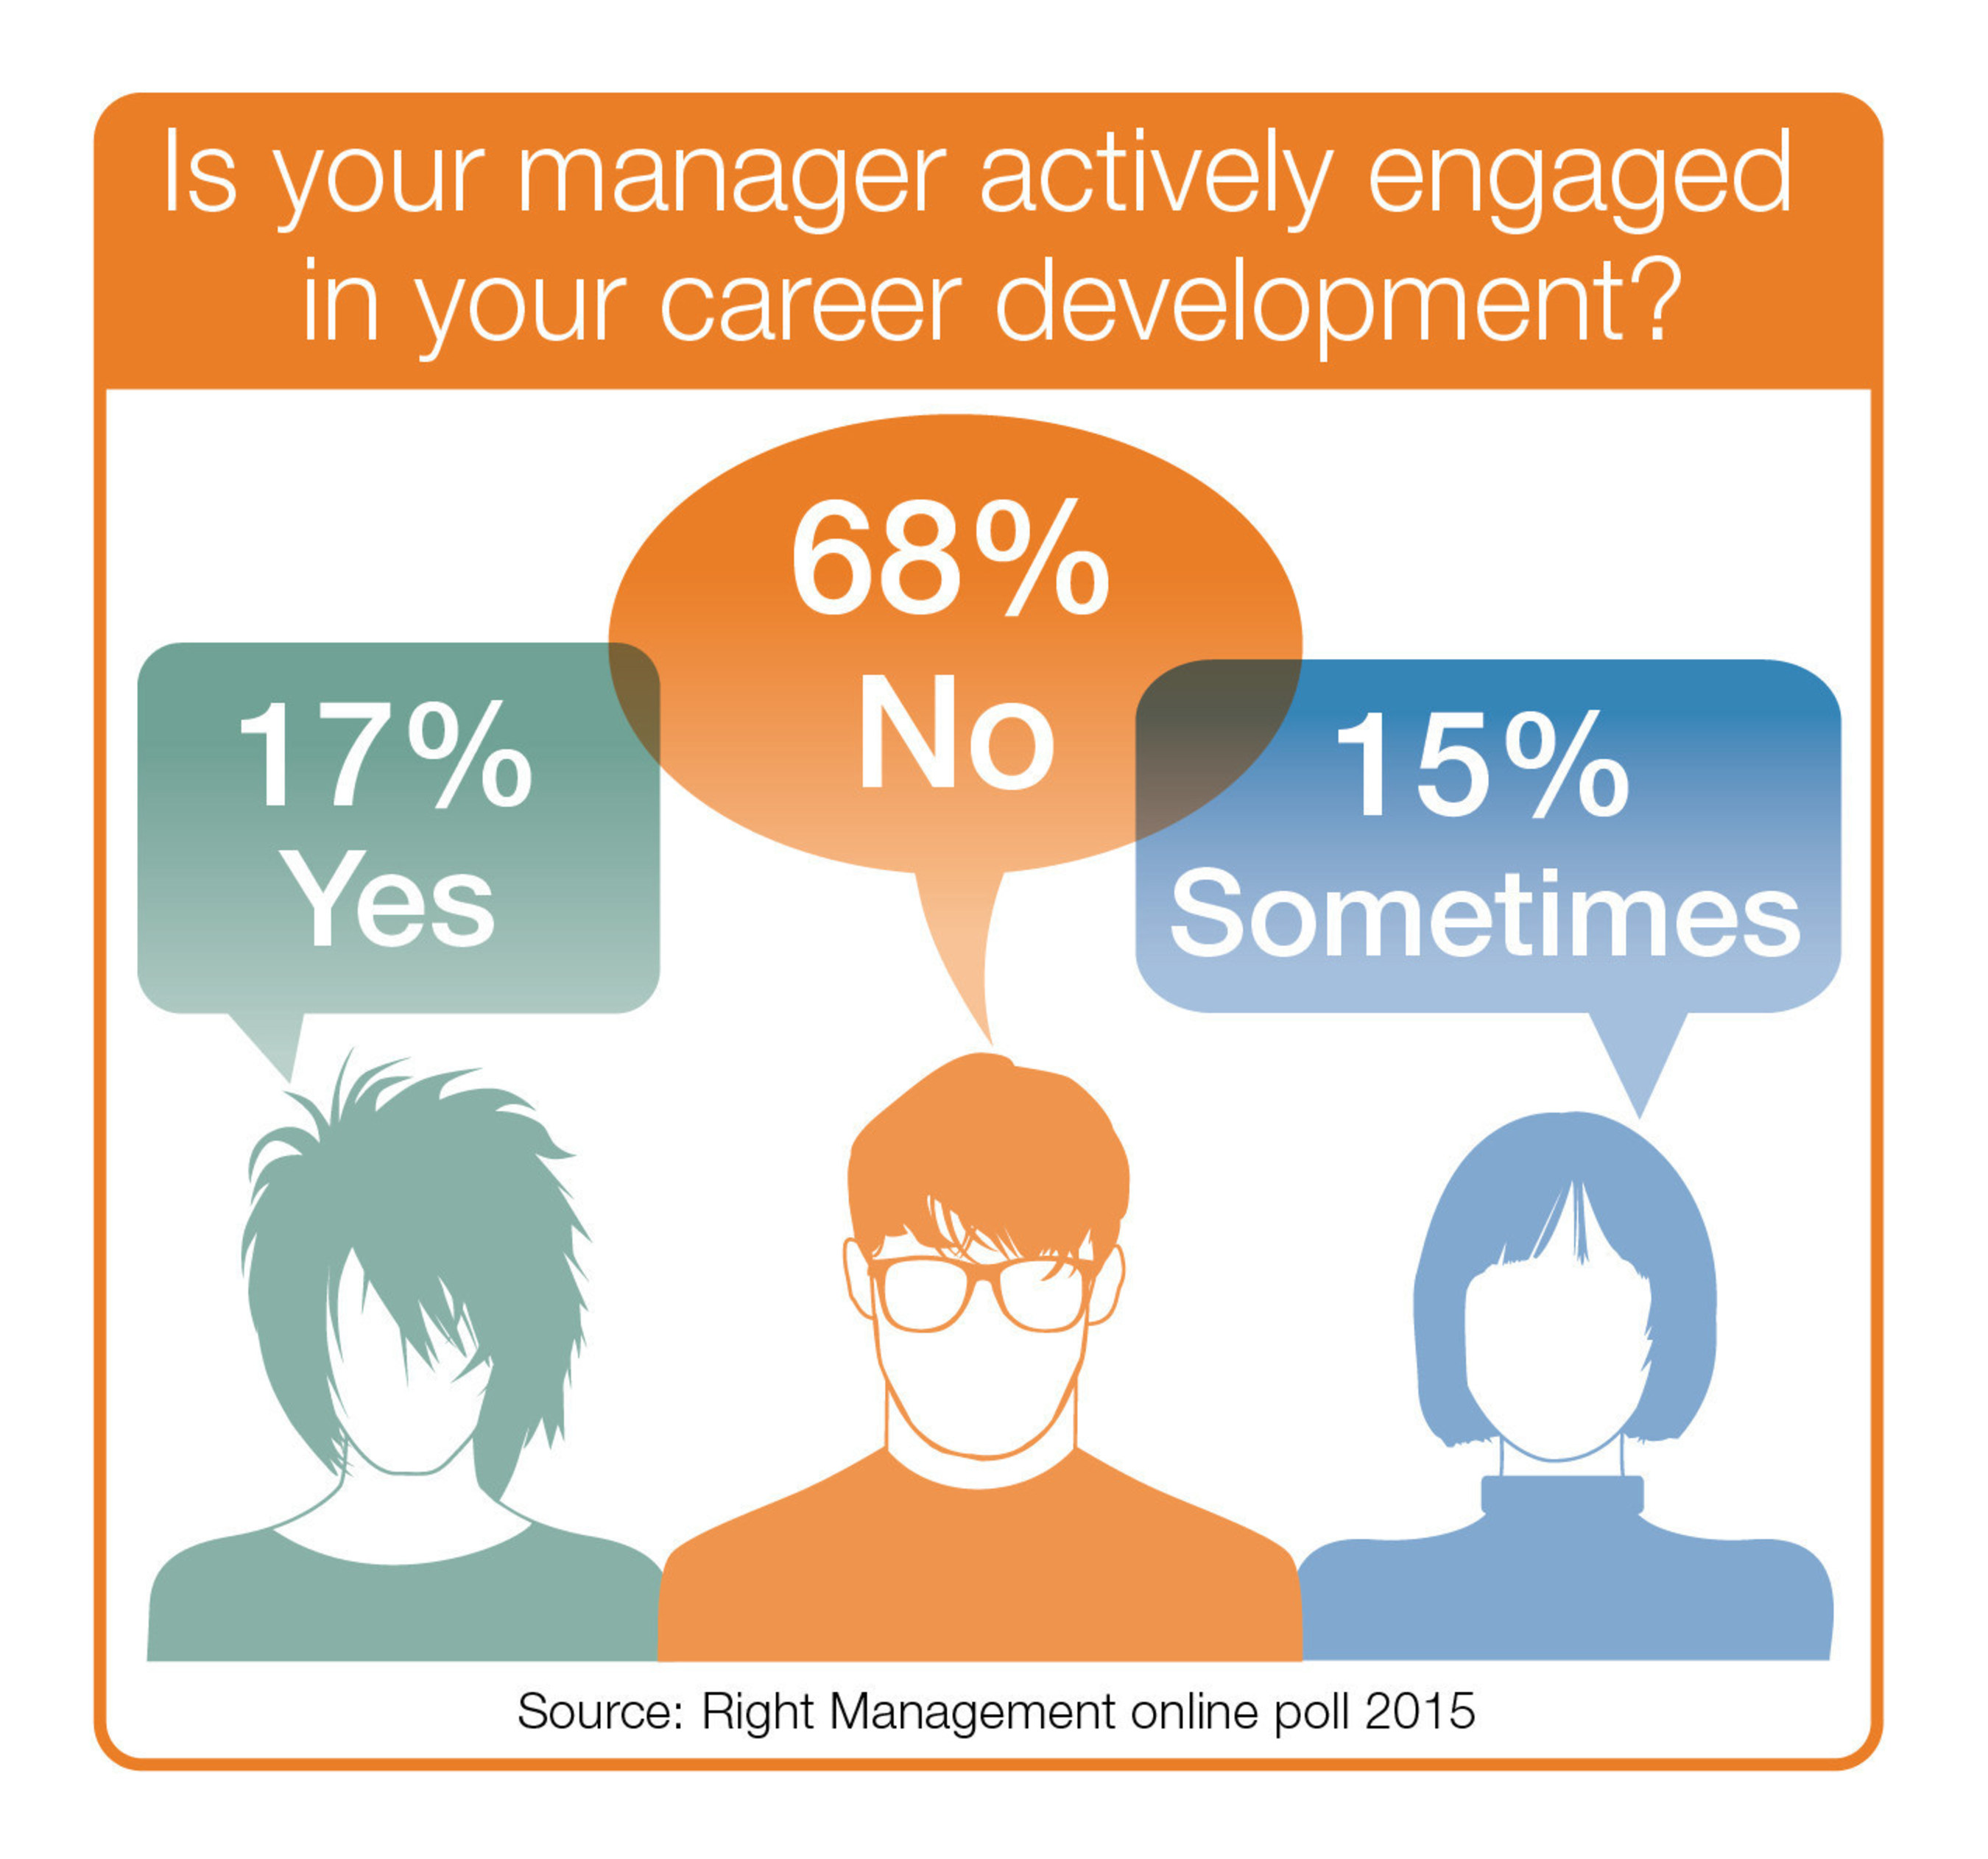 Two-thirds of managers need guidance on how to coach and develop careers